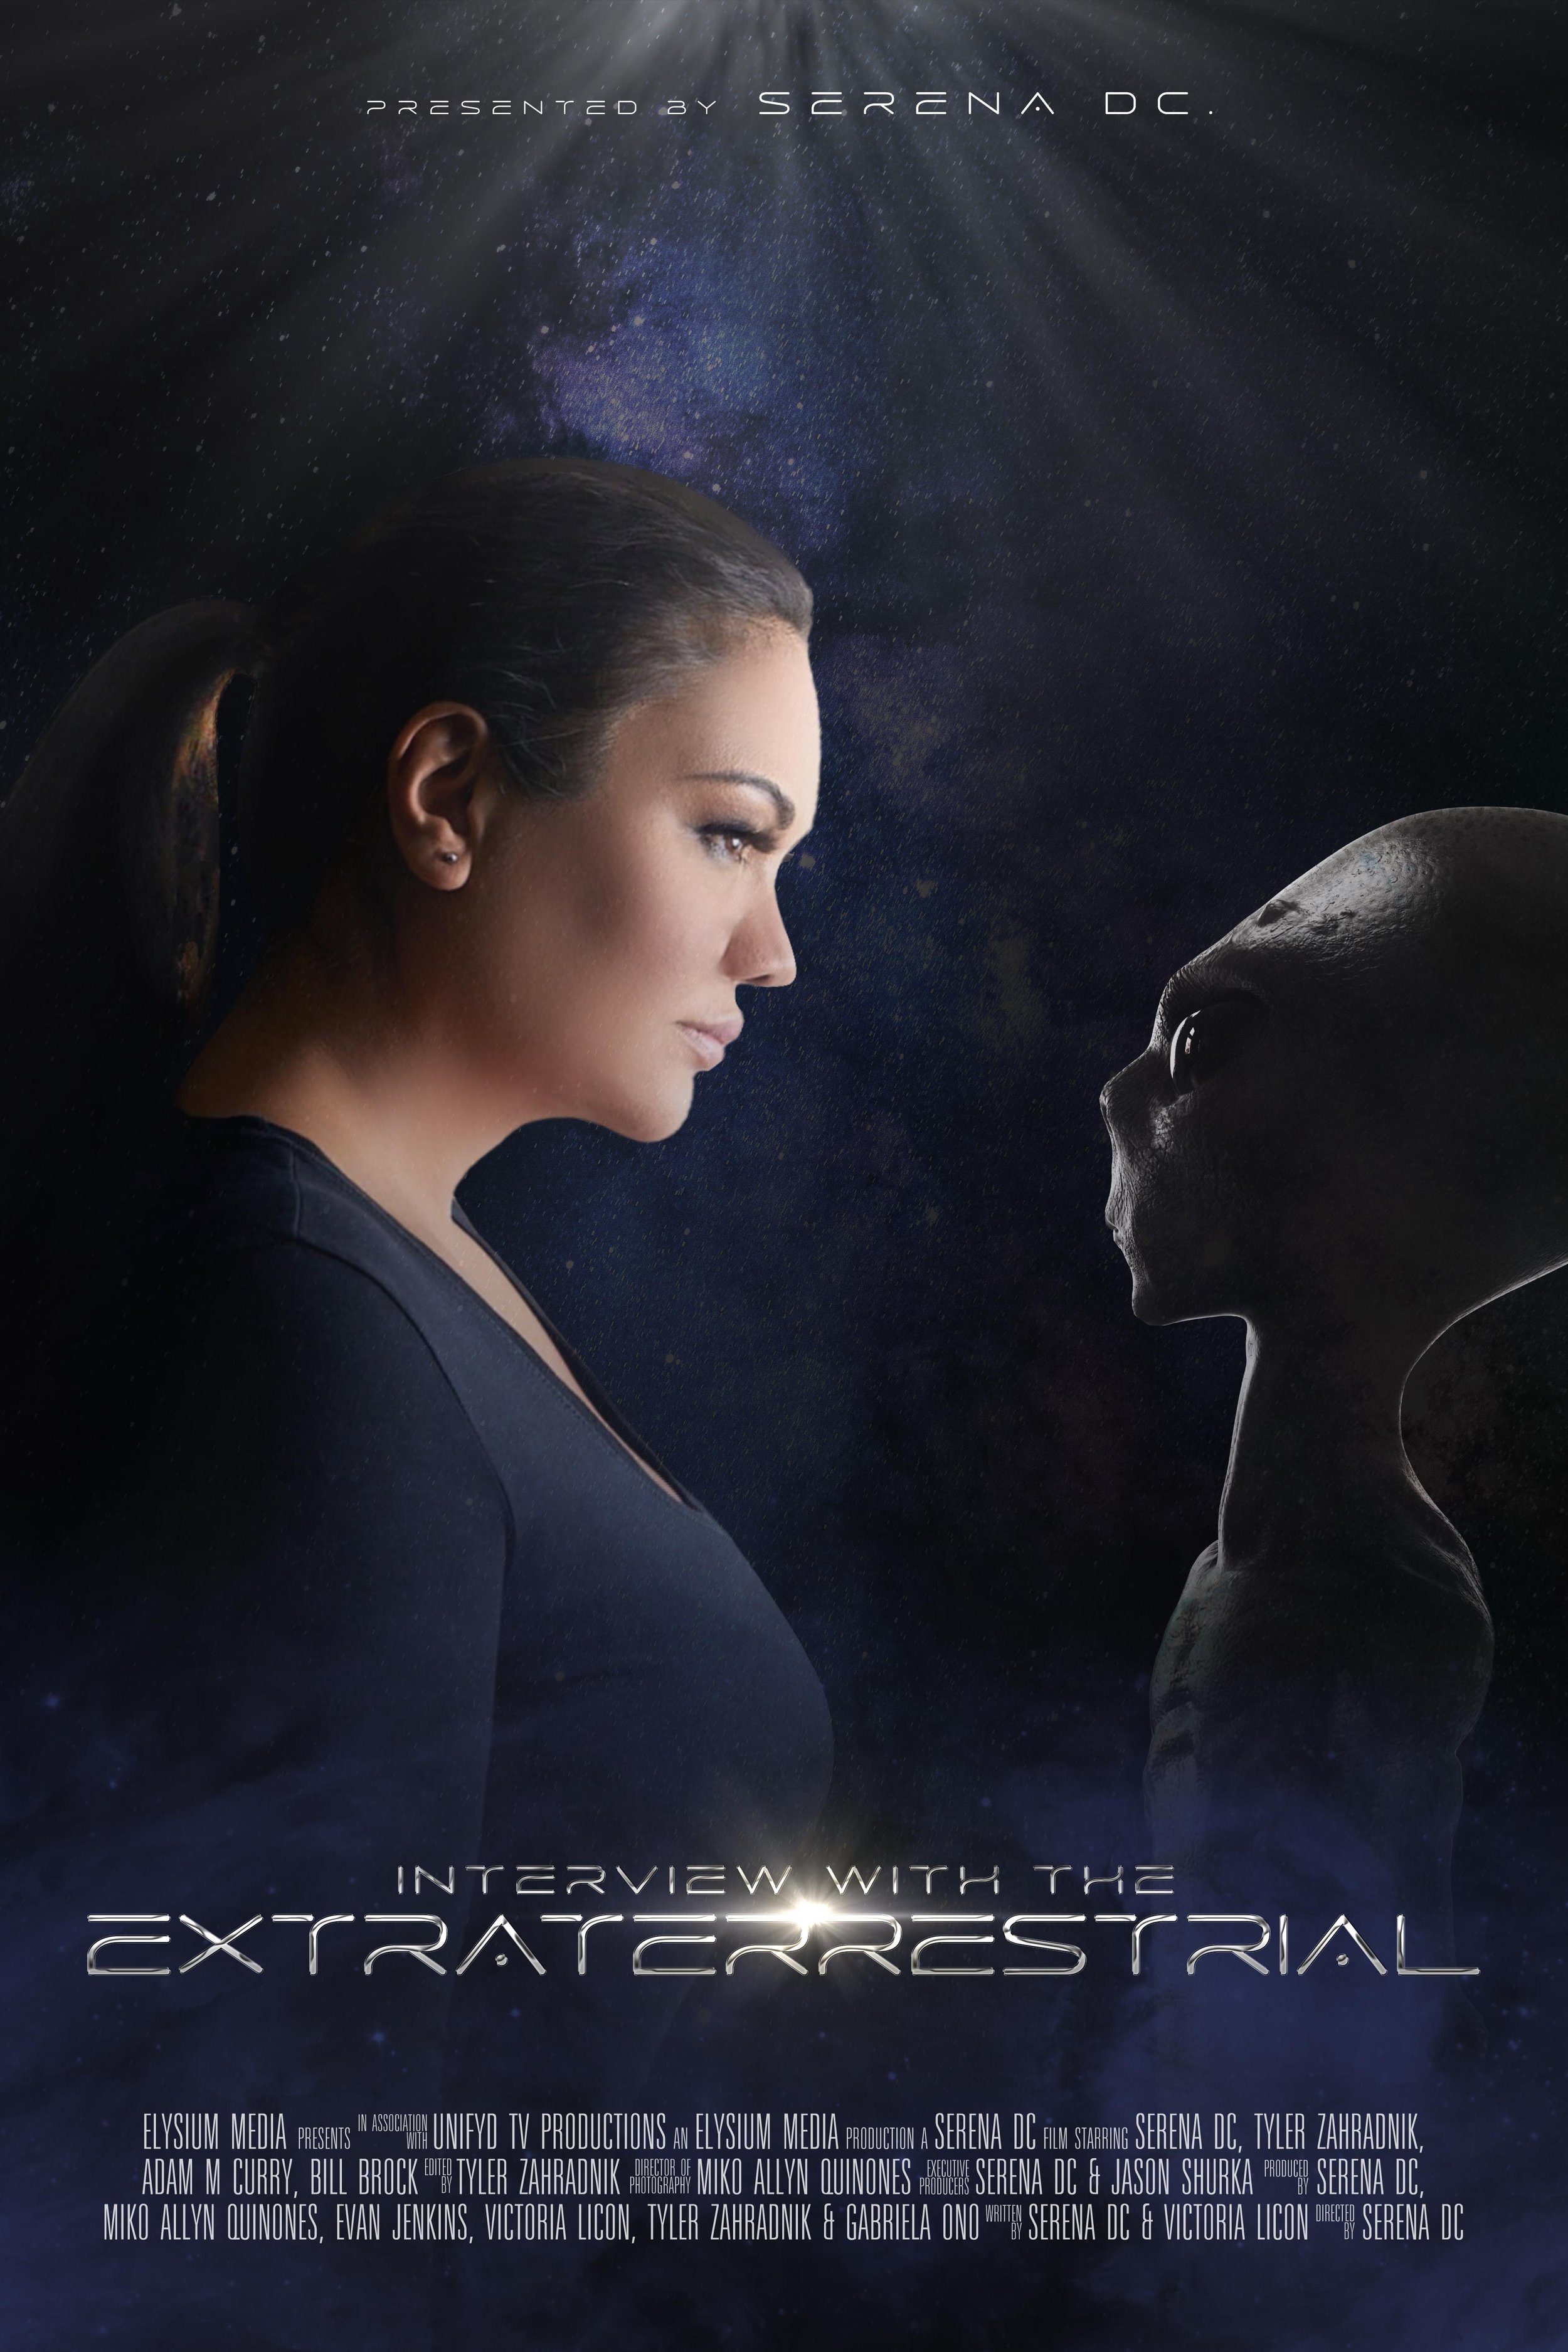 Interview with the Extraterrestrial